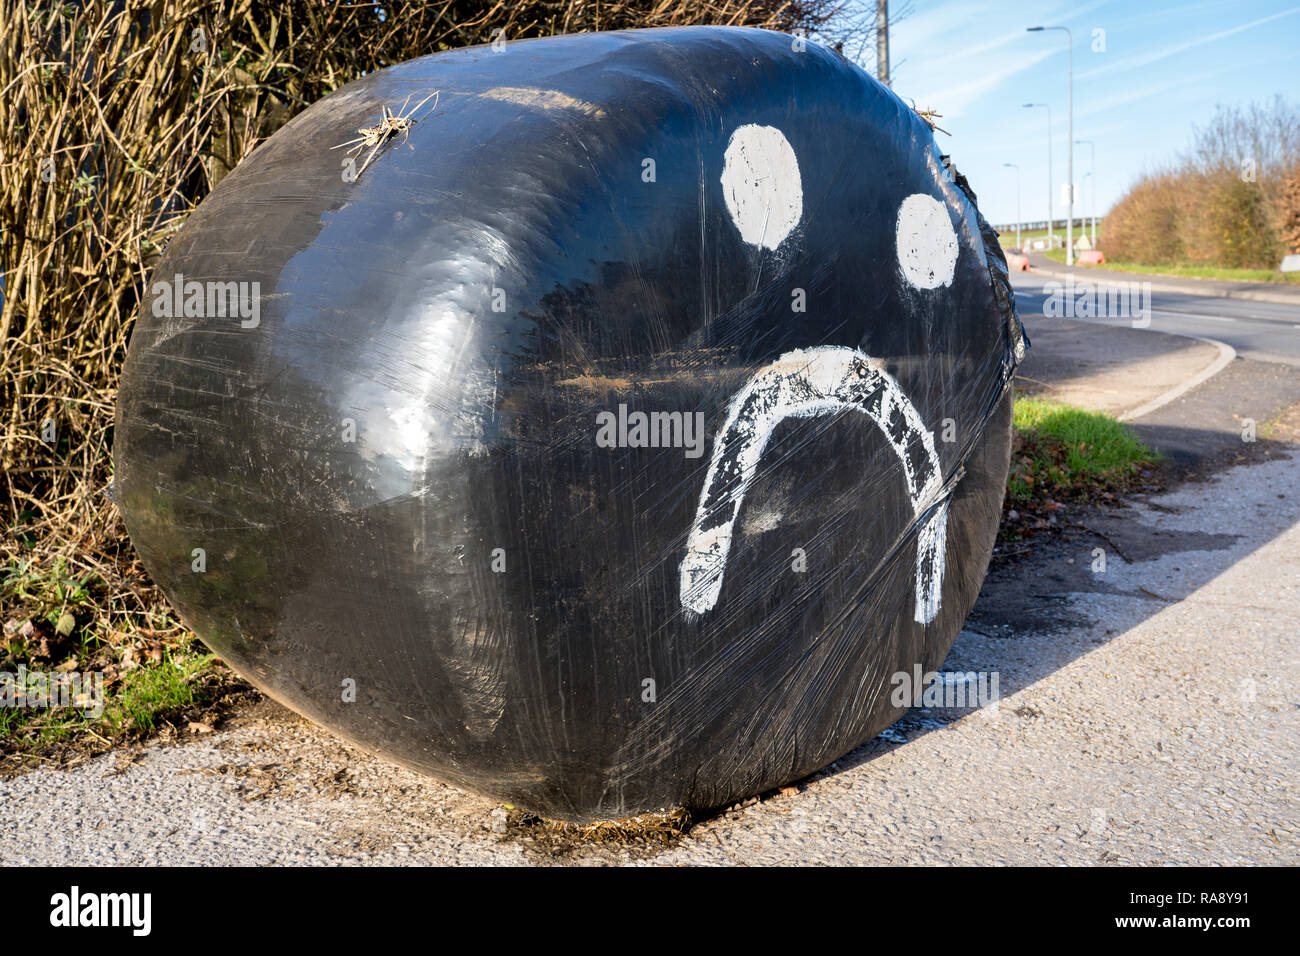 A sad smiley face painted on a hay bale in Cardiff, South Wales Stock Photo